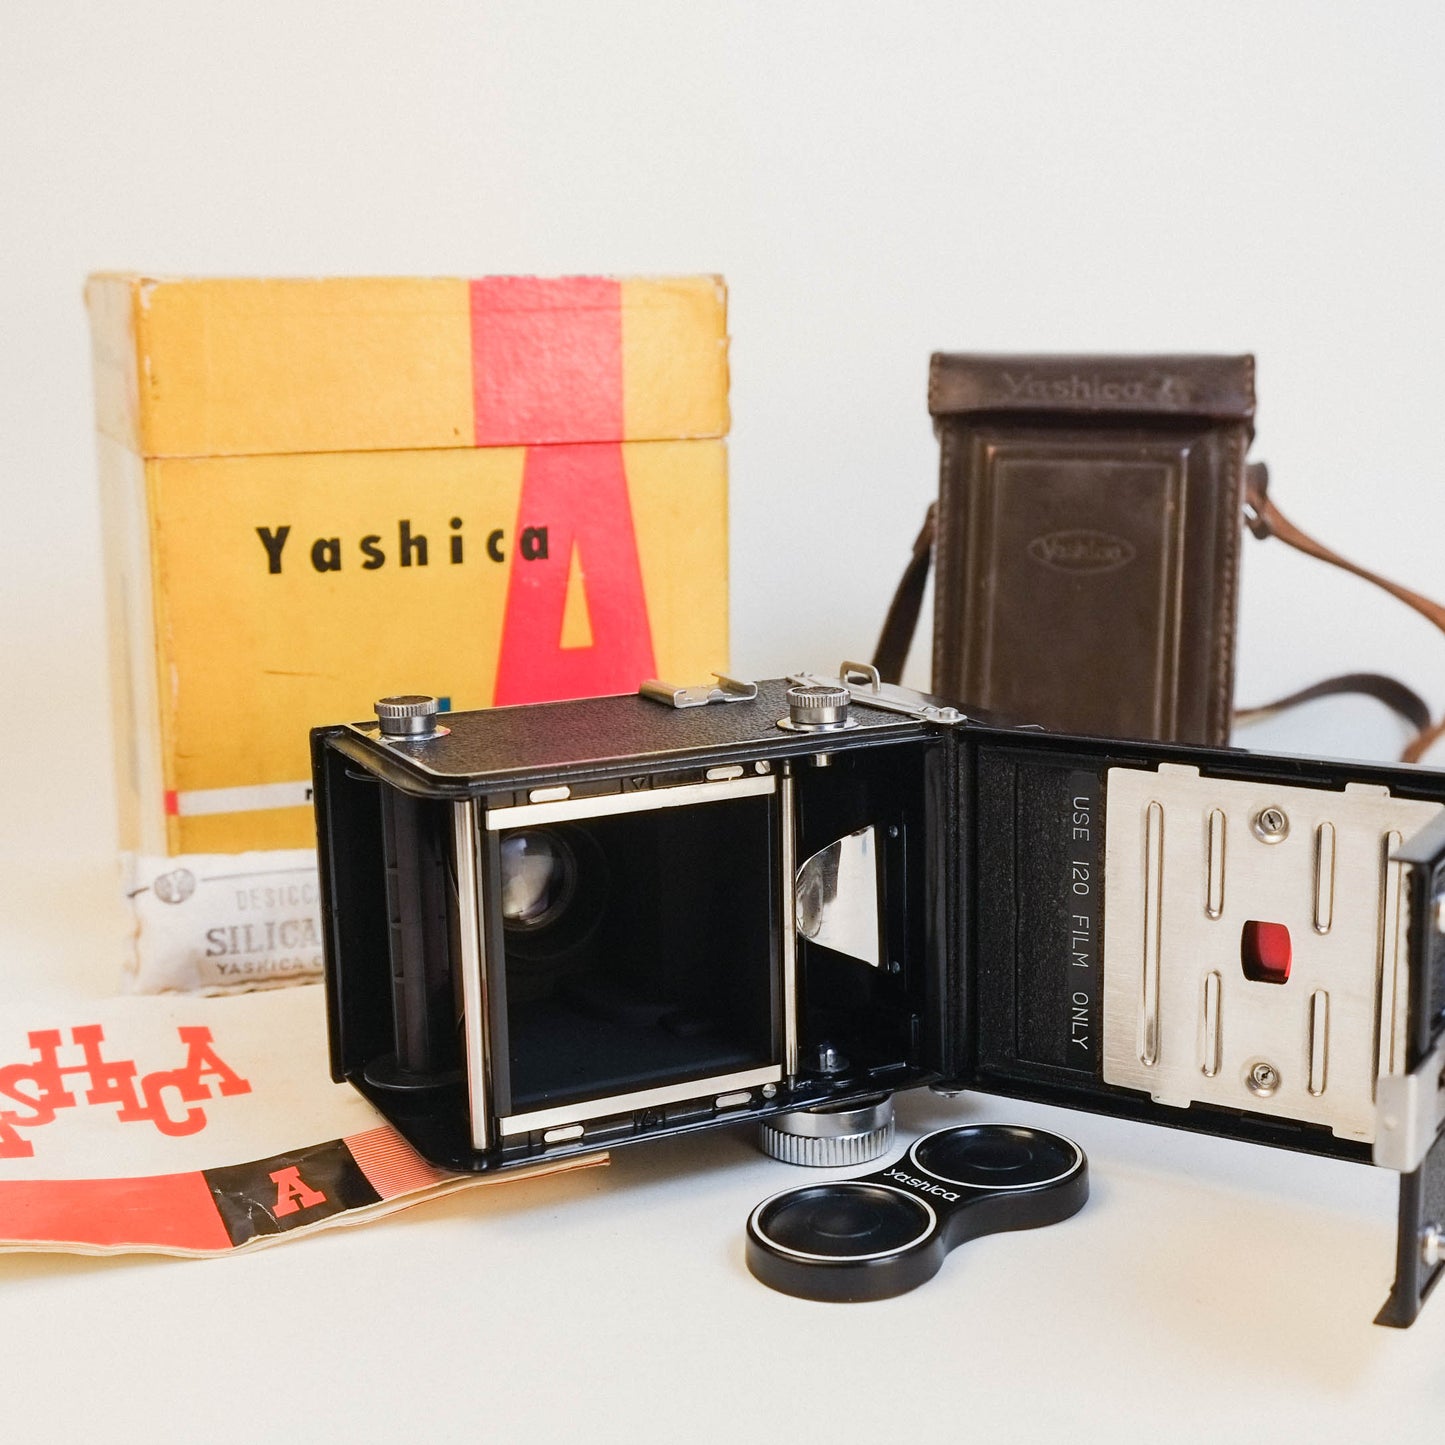 Yashica A TLR - Complete boxed set